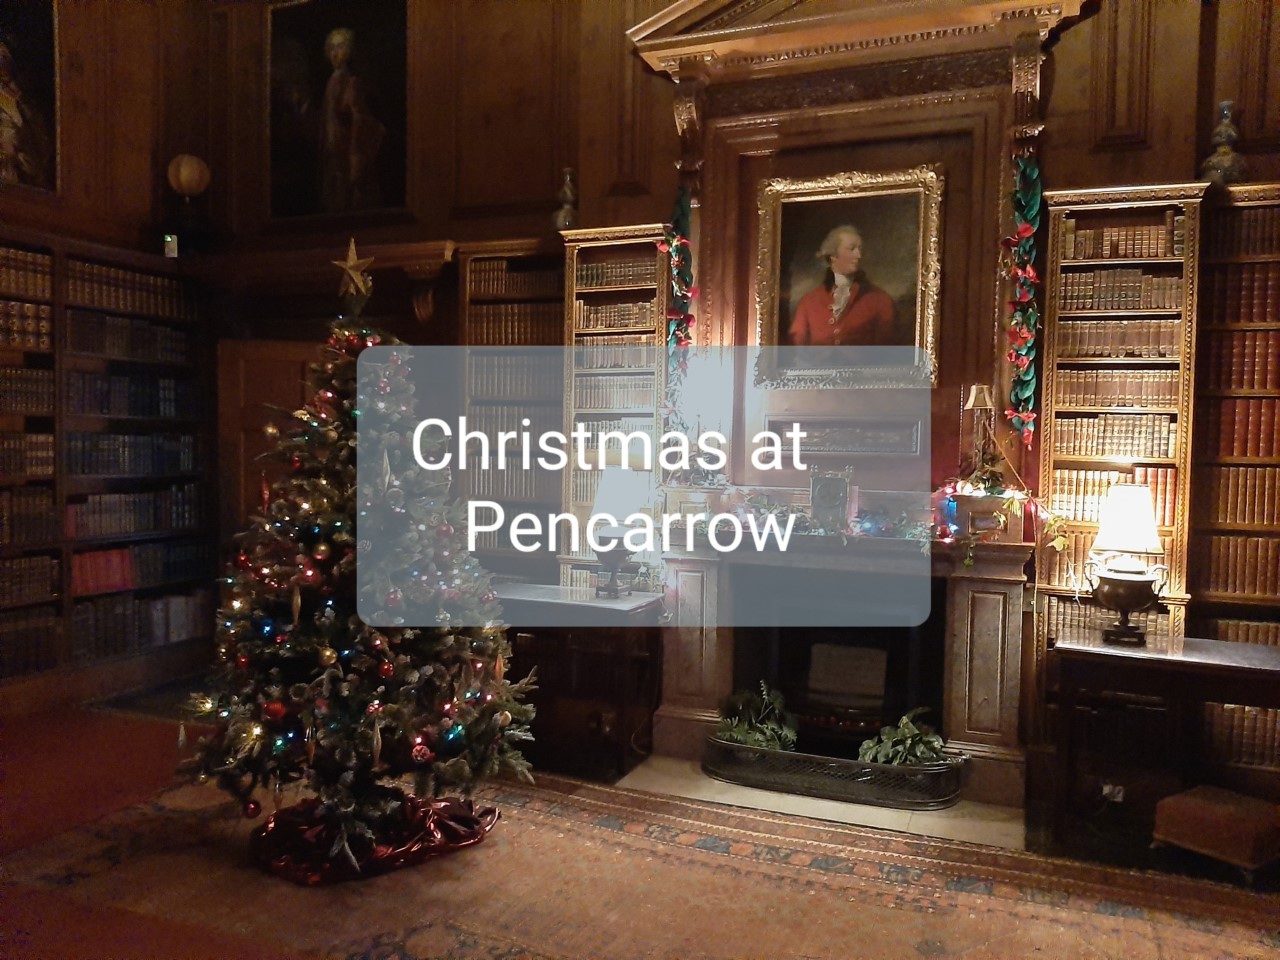 Celebrate Christmas at Pencarrow with The Washaway Gallery Choir